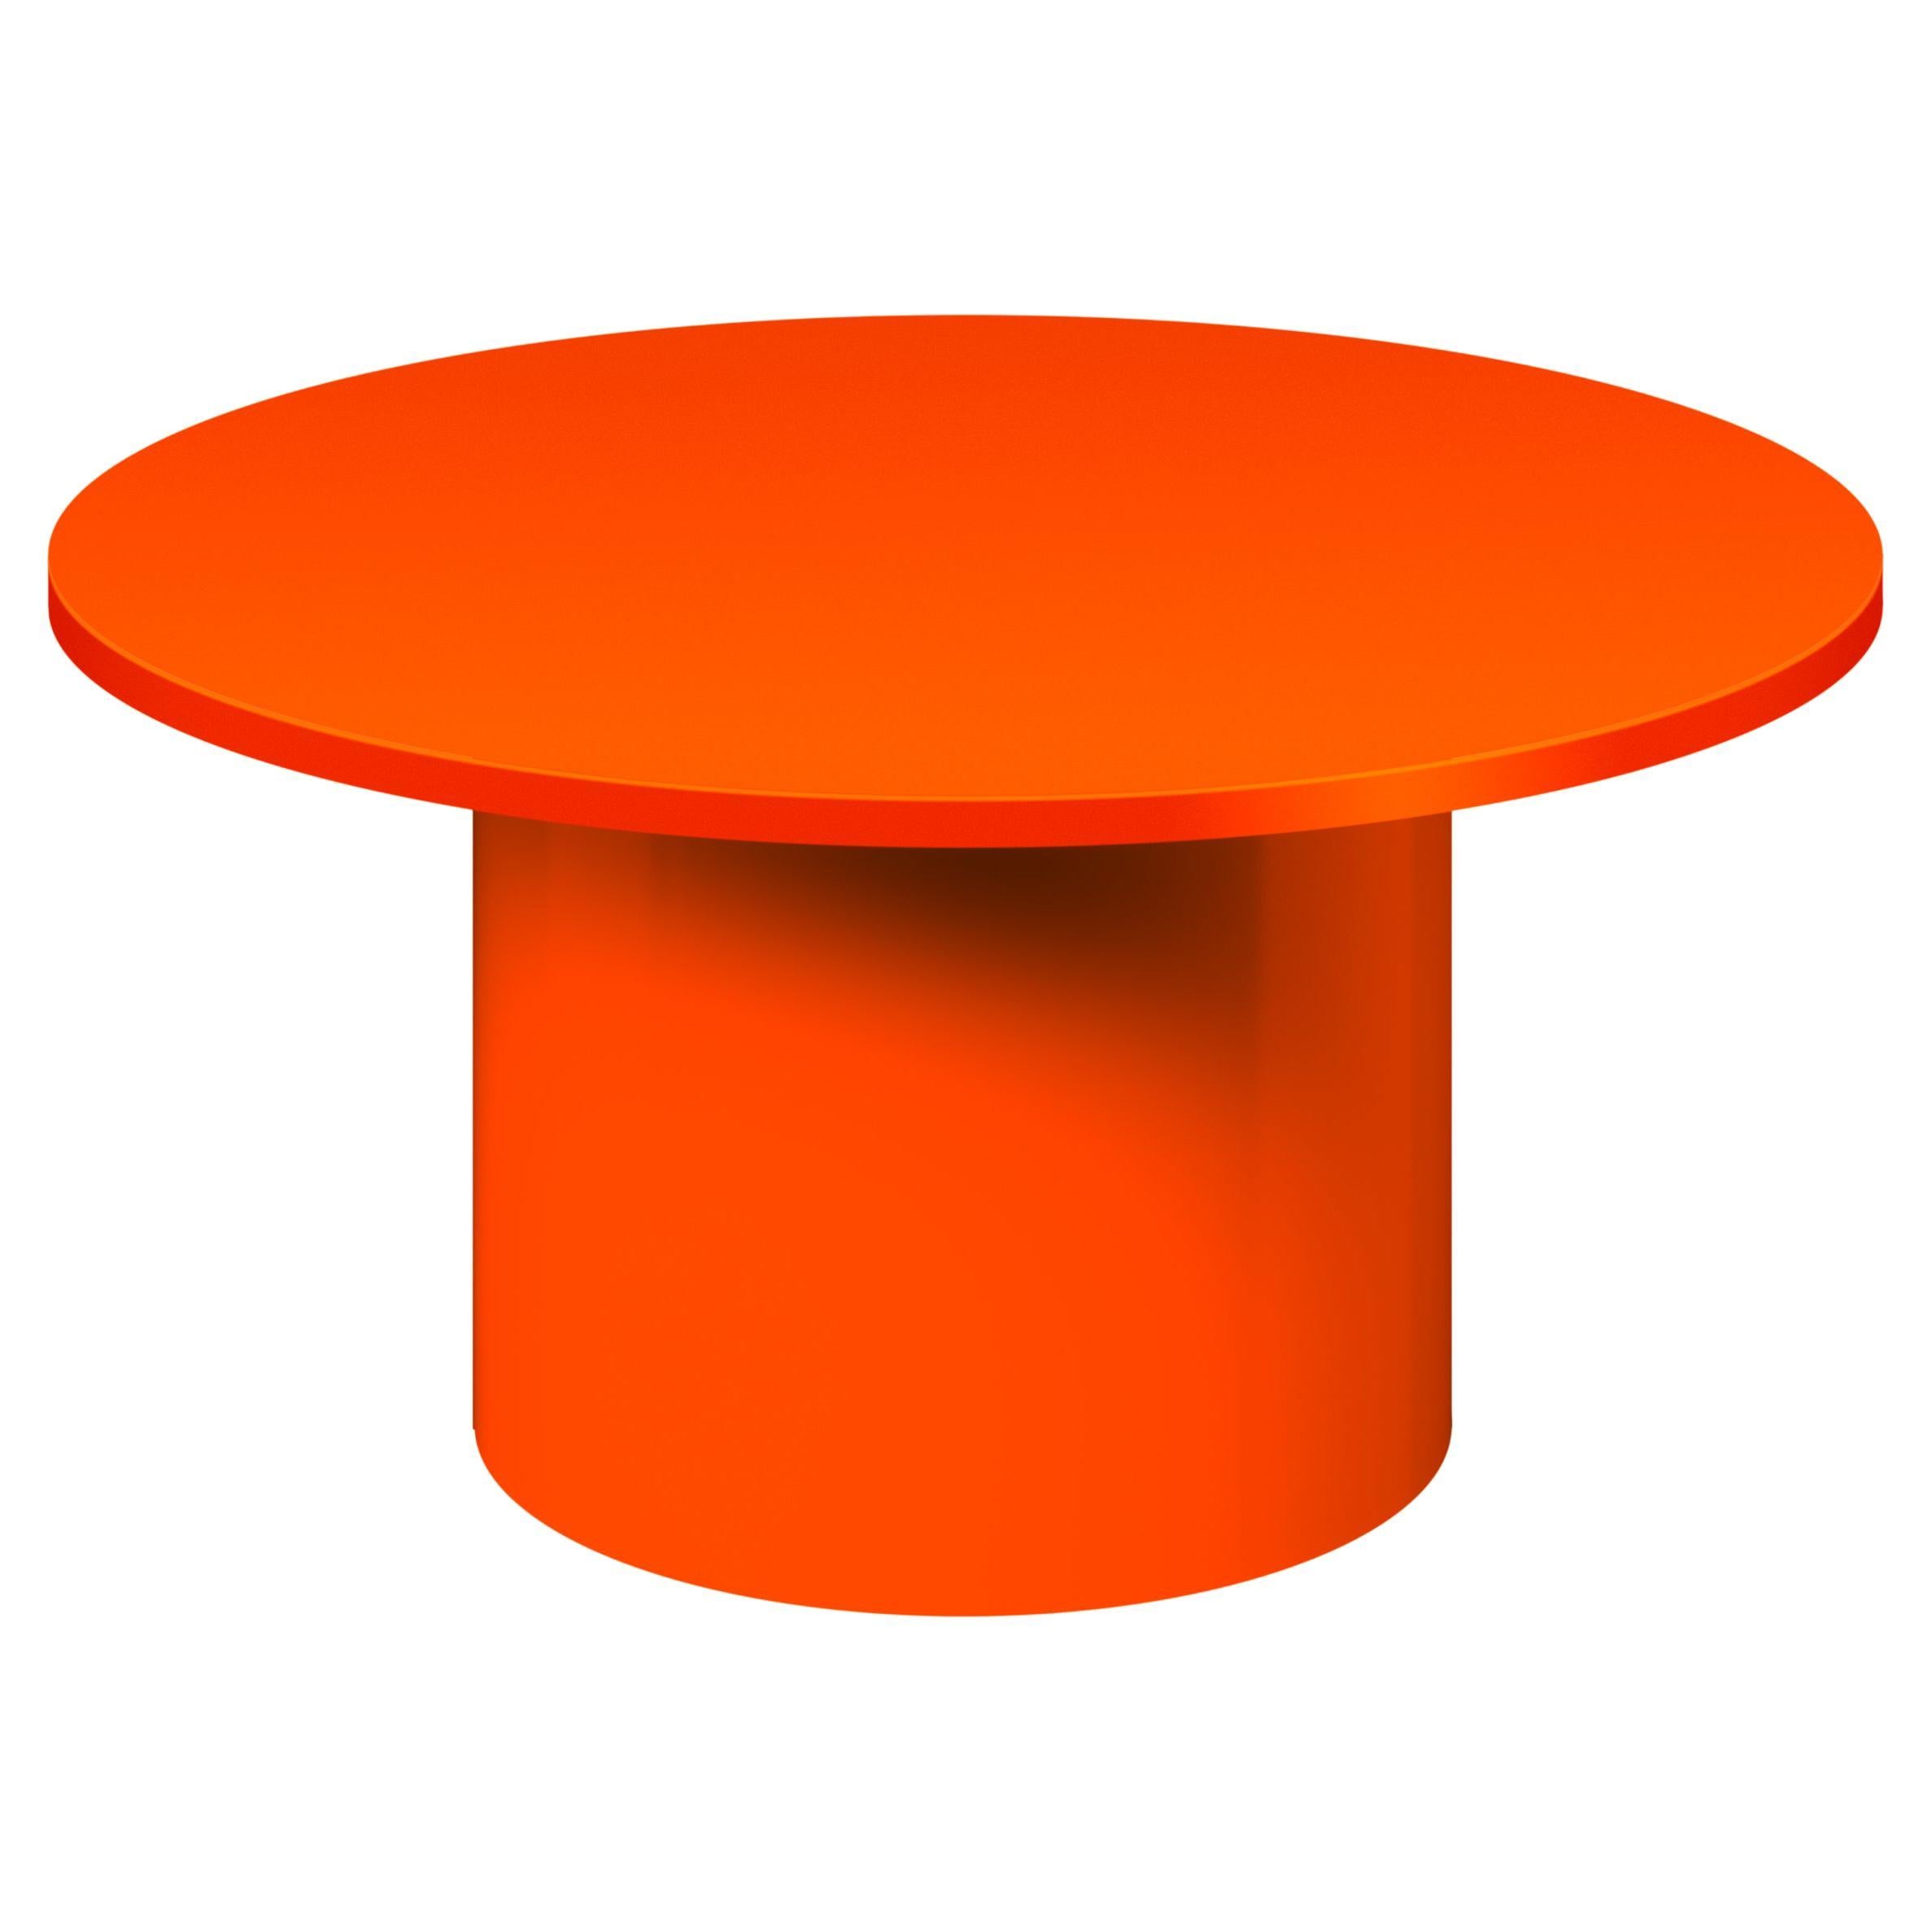 he iconic side table ENOKI by Philipp Mainzer is introduced in all metal, highlighting its essential and minimal form. Made of steel, powder-coated in colours silk grey, pure orange and jet black or zinc-plated in a rainbow hued version the table